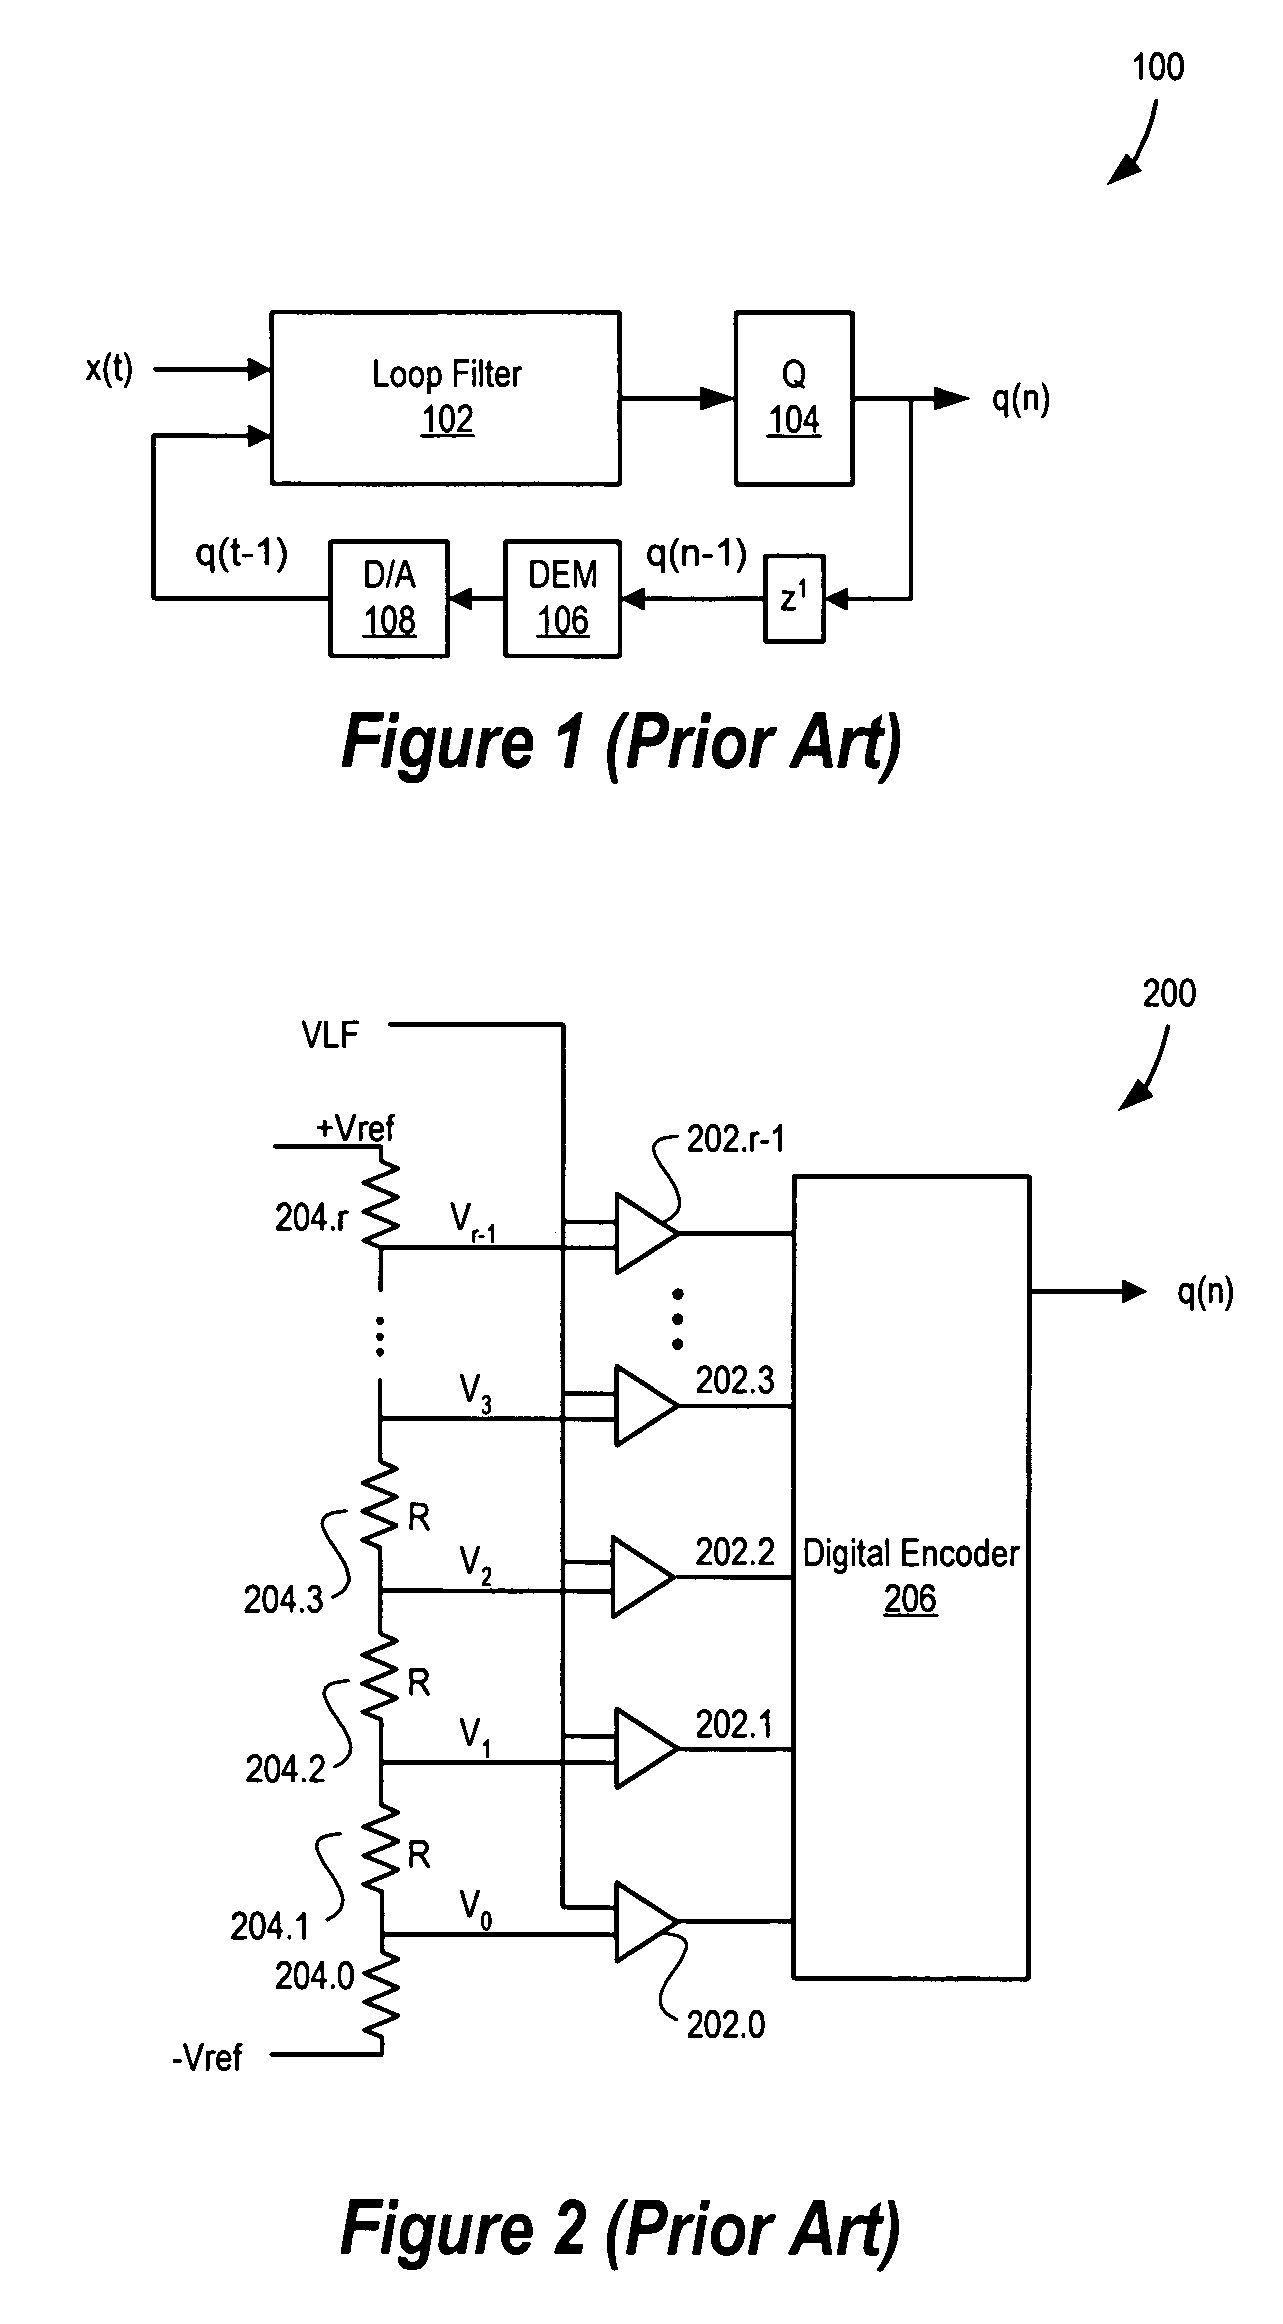 Delta sigma modulator analog-to-digital converters with multiple threshold comparisons during a delta sigma modulator output cycle